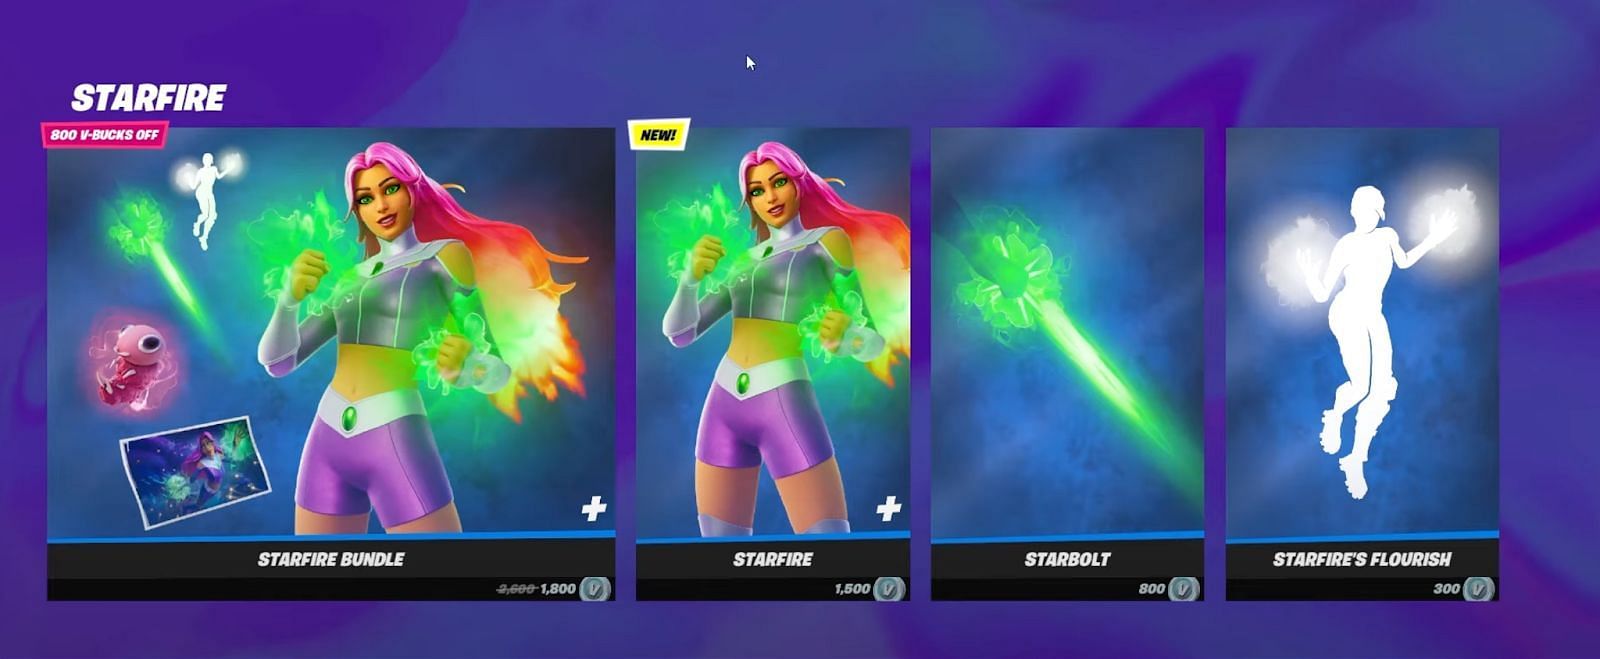 Fortnite Starfire Outfit